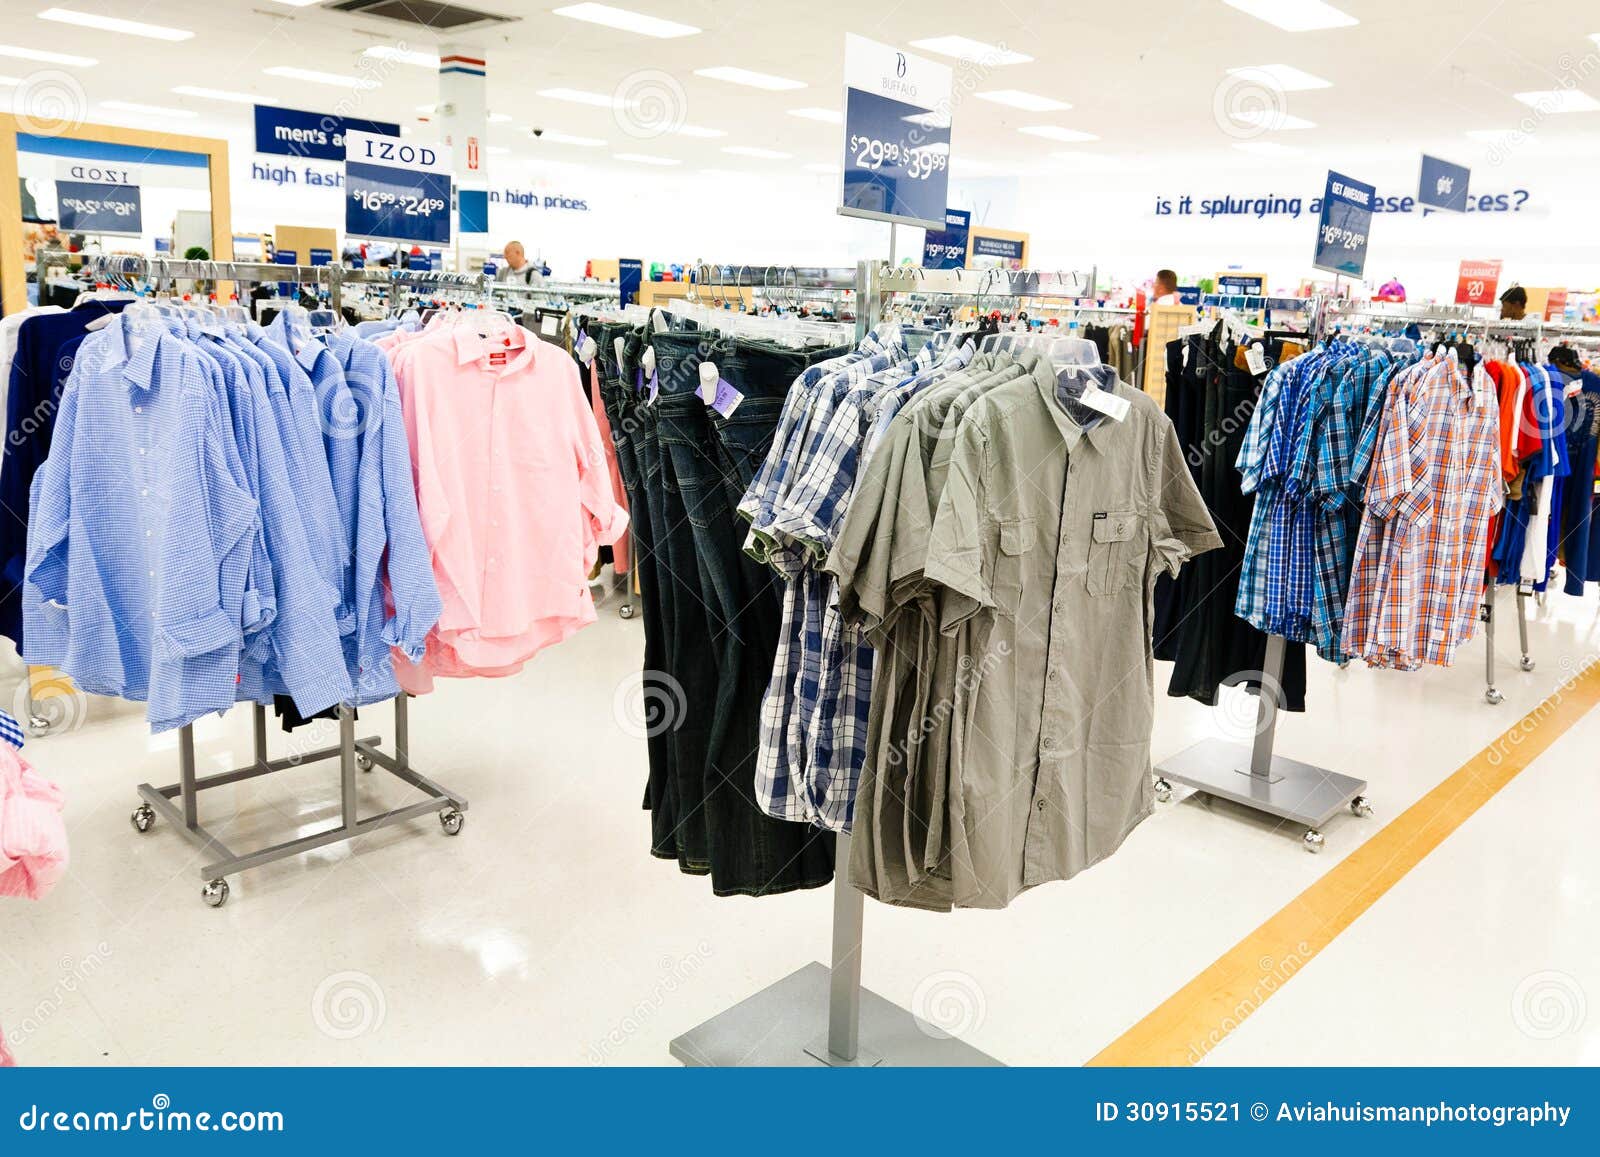 shopping men s department clothing featuring popular brands clothing bargain store marshall fashion retail 30915521